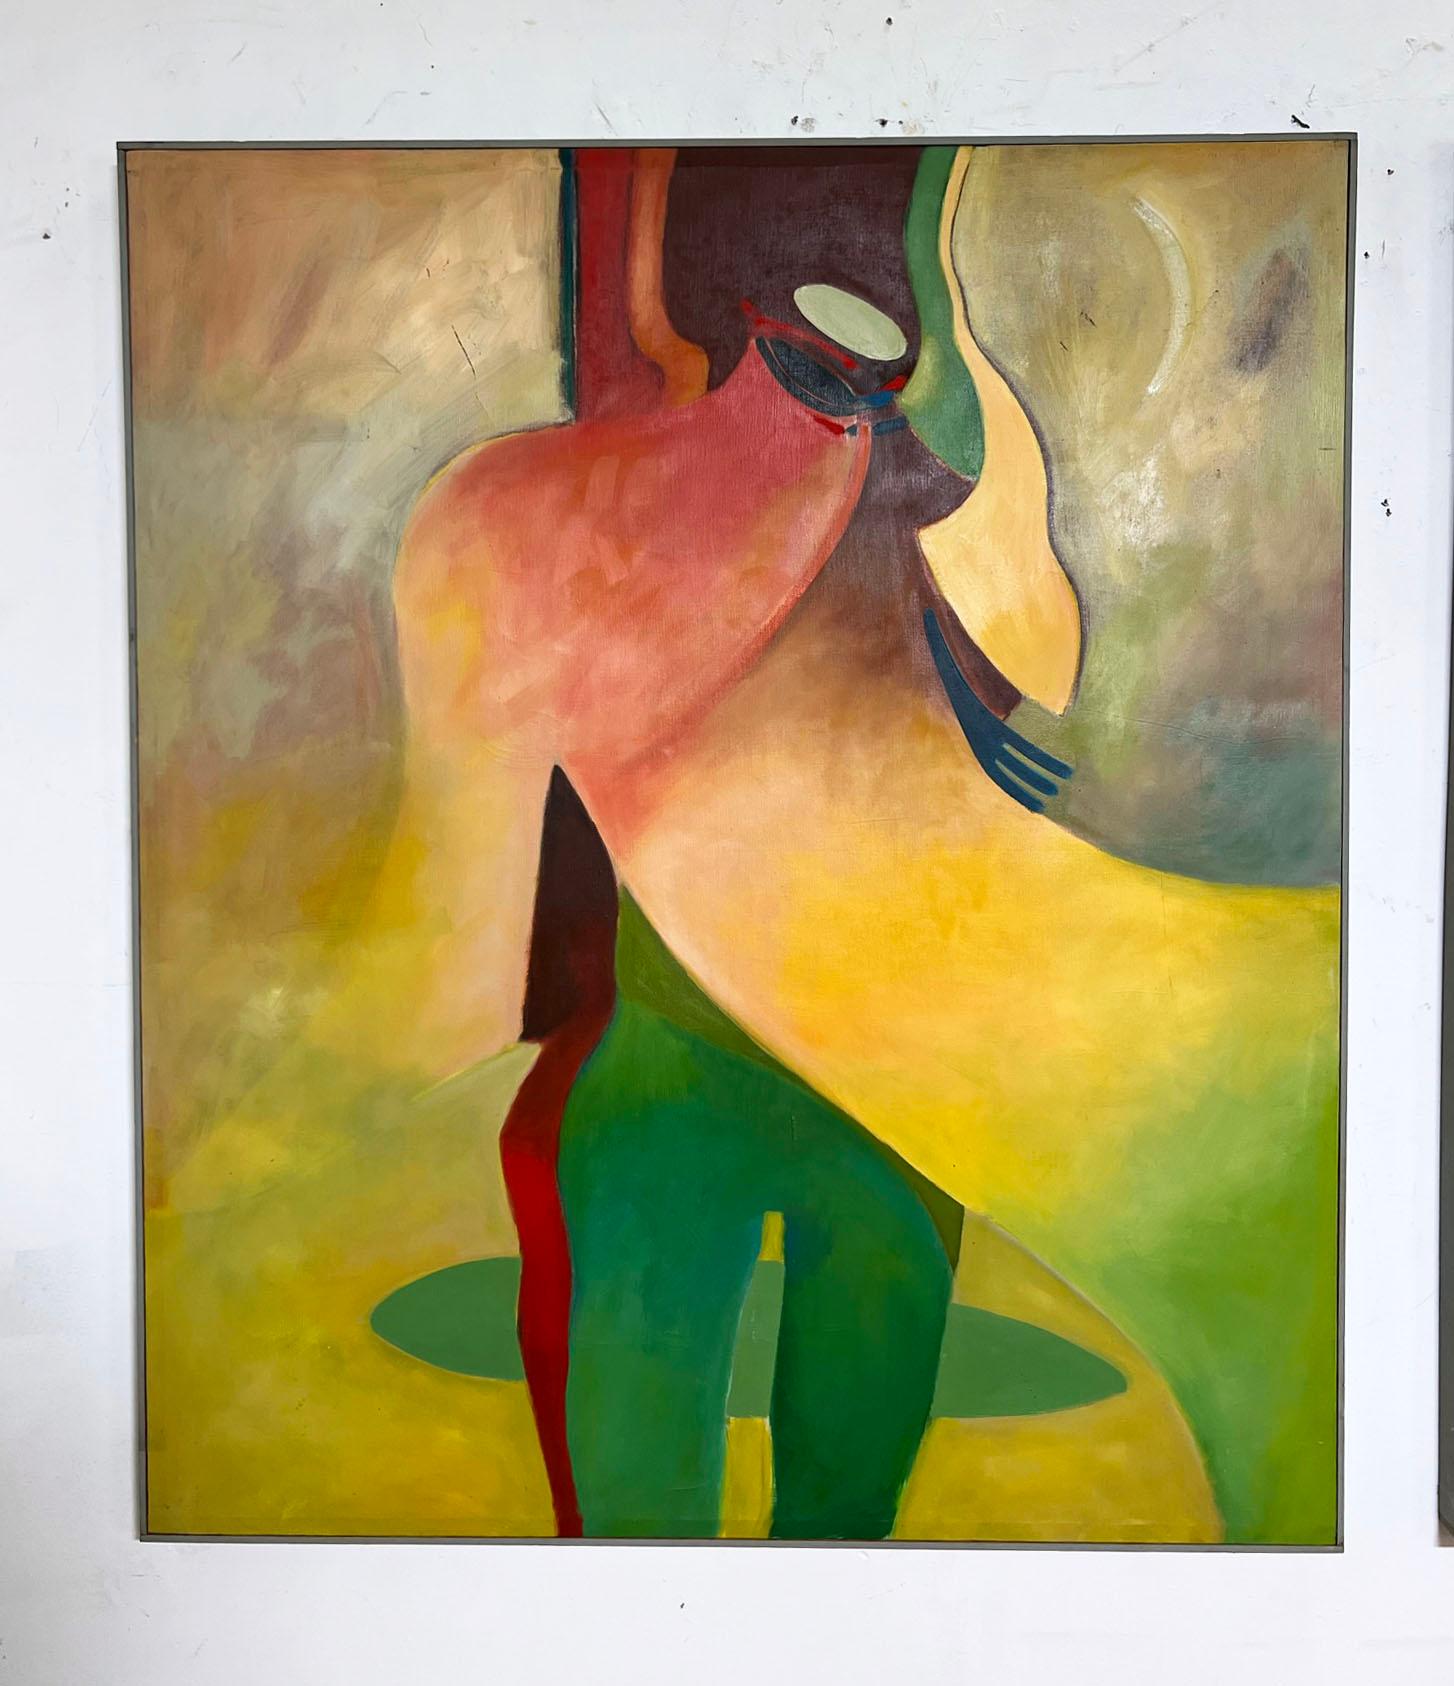 An unusual diptych of abstract figurative work in the manner of Roy de Maistre or Francis Bacon, signed L. Alicea, d. 1981.